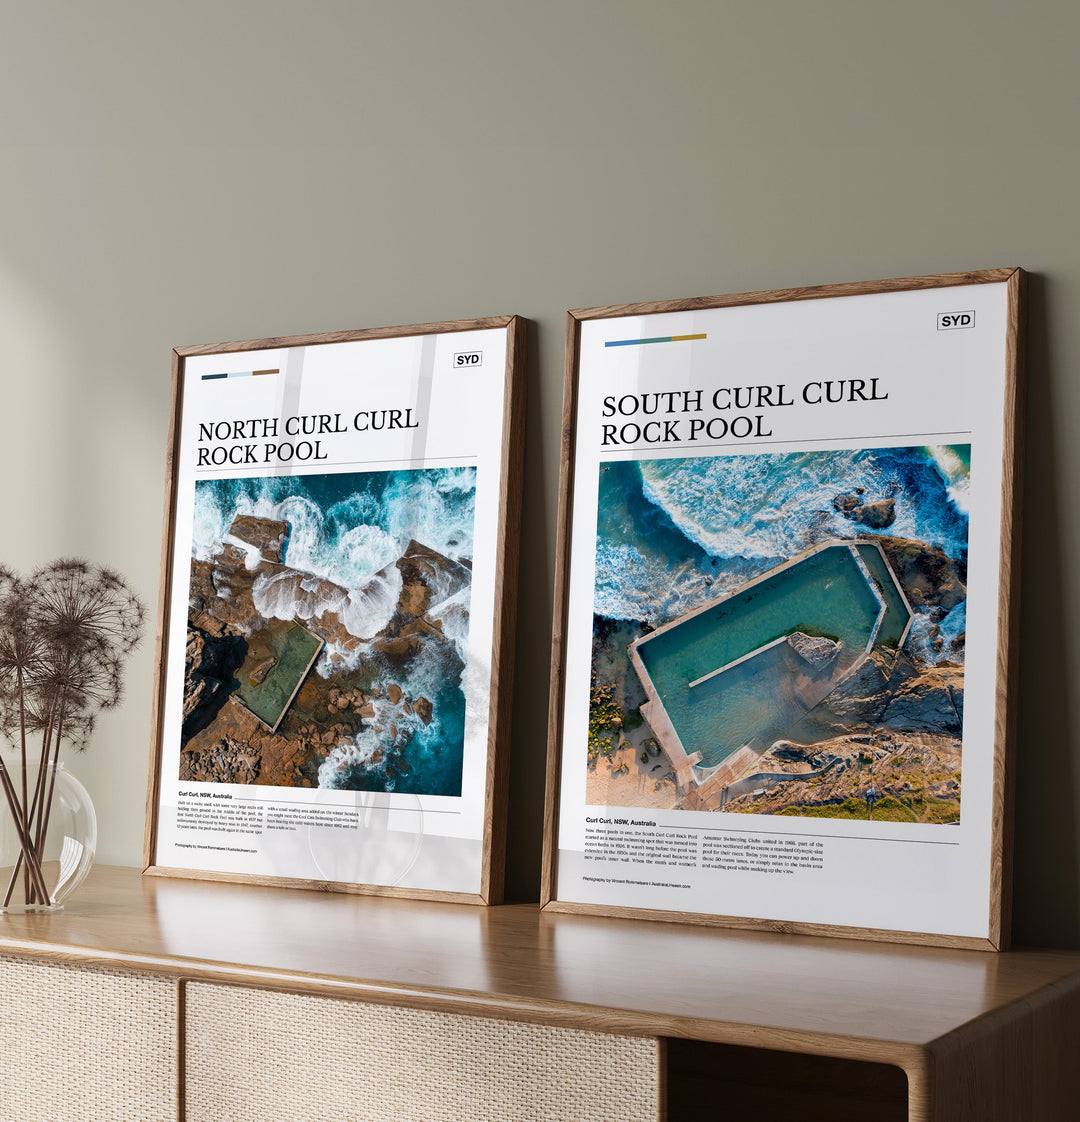 South Curl Curl Rock Pool Editorial Poster - Australia Unseen